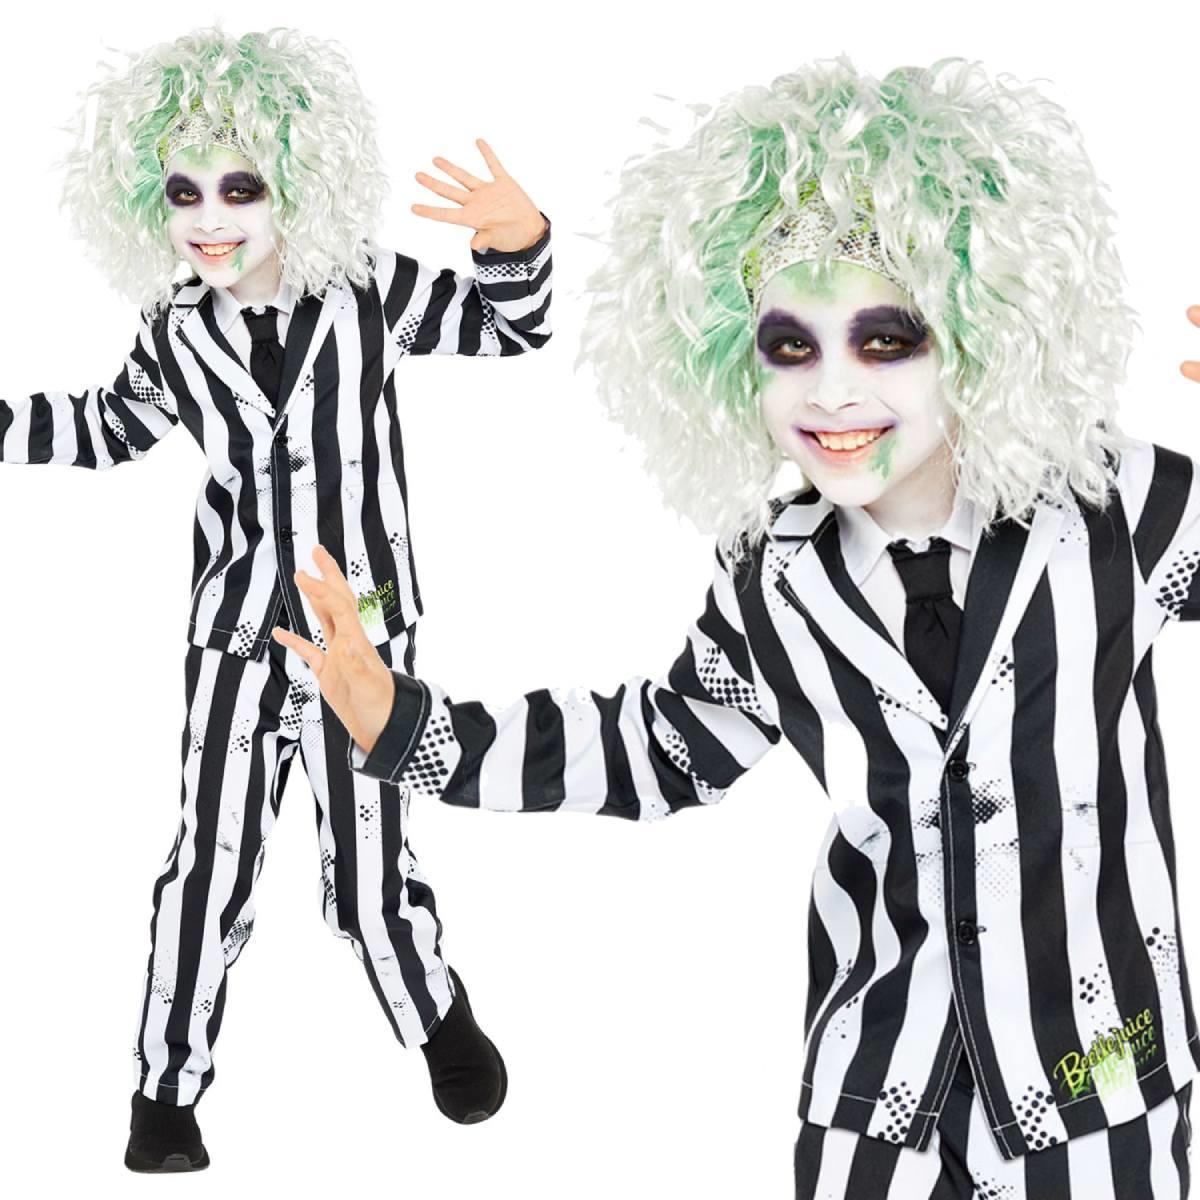 Beetlejuice Boy Fancy Dress Costume by Amscan 9907628 available here at Karnival Costumes online party shop